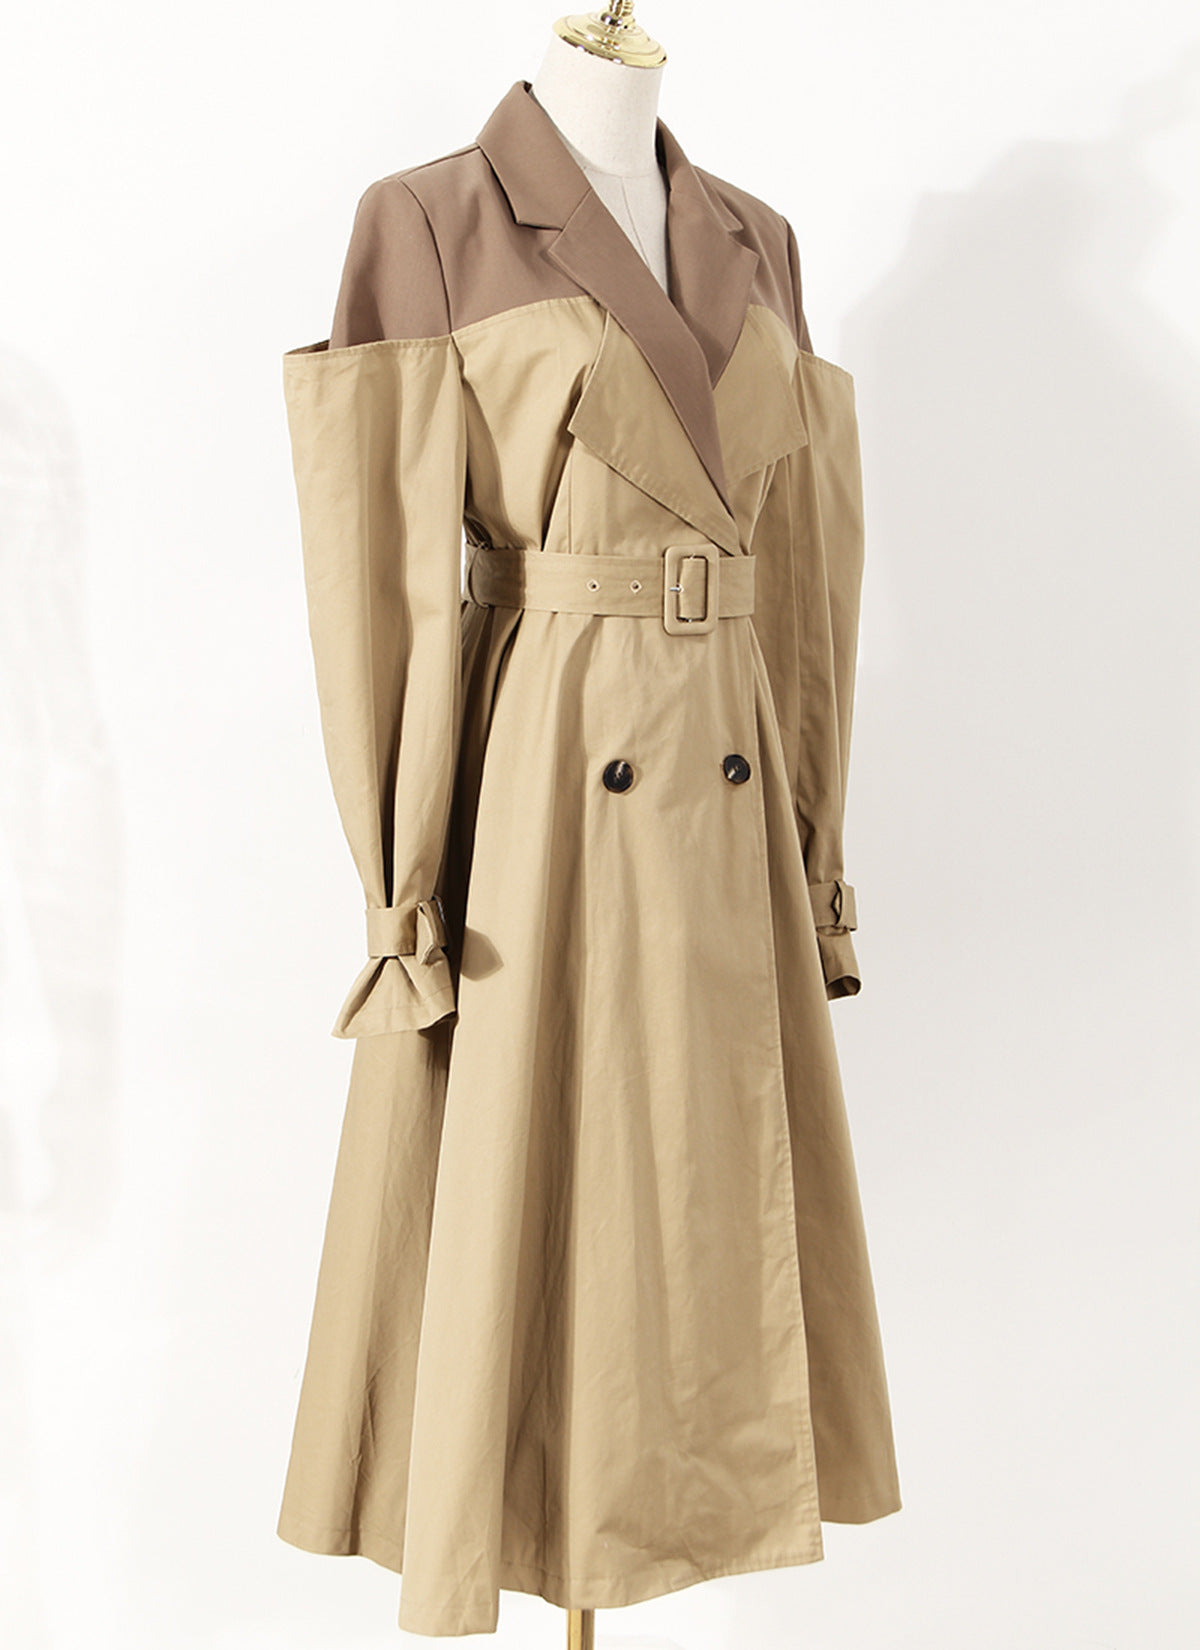 Two Color Knot Collar Trench Coat Women  Mid Length Knee Autumn Design Waist Trimming Coat